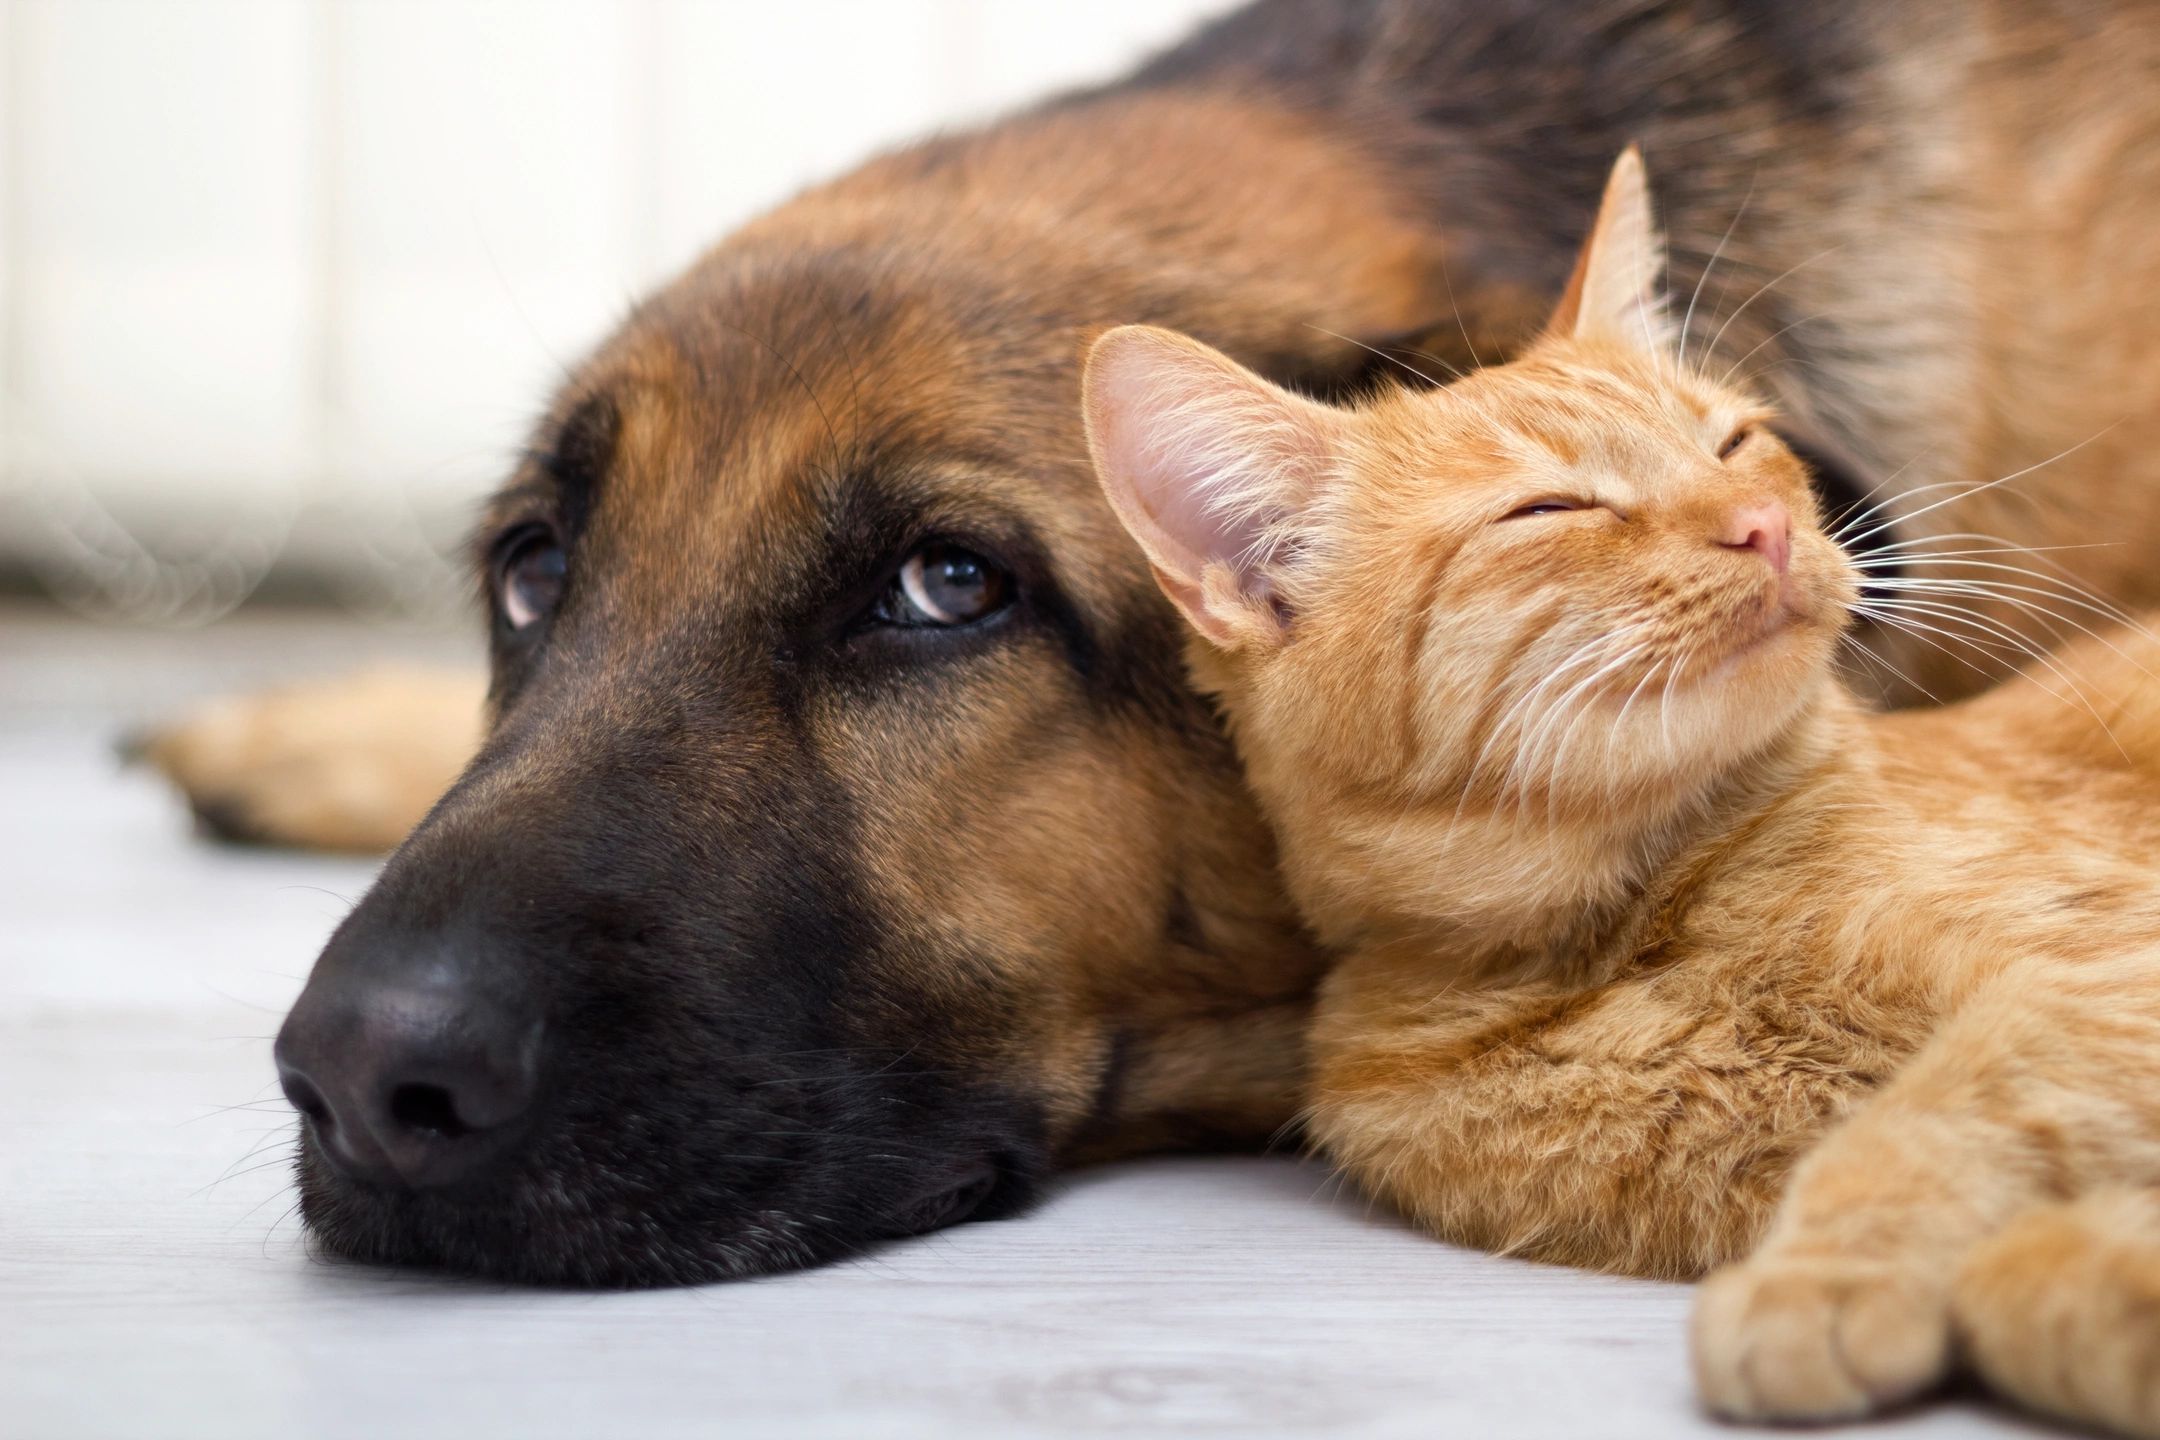 a dog and cat relaxing together